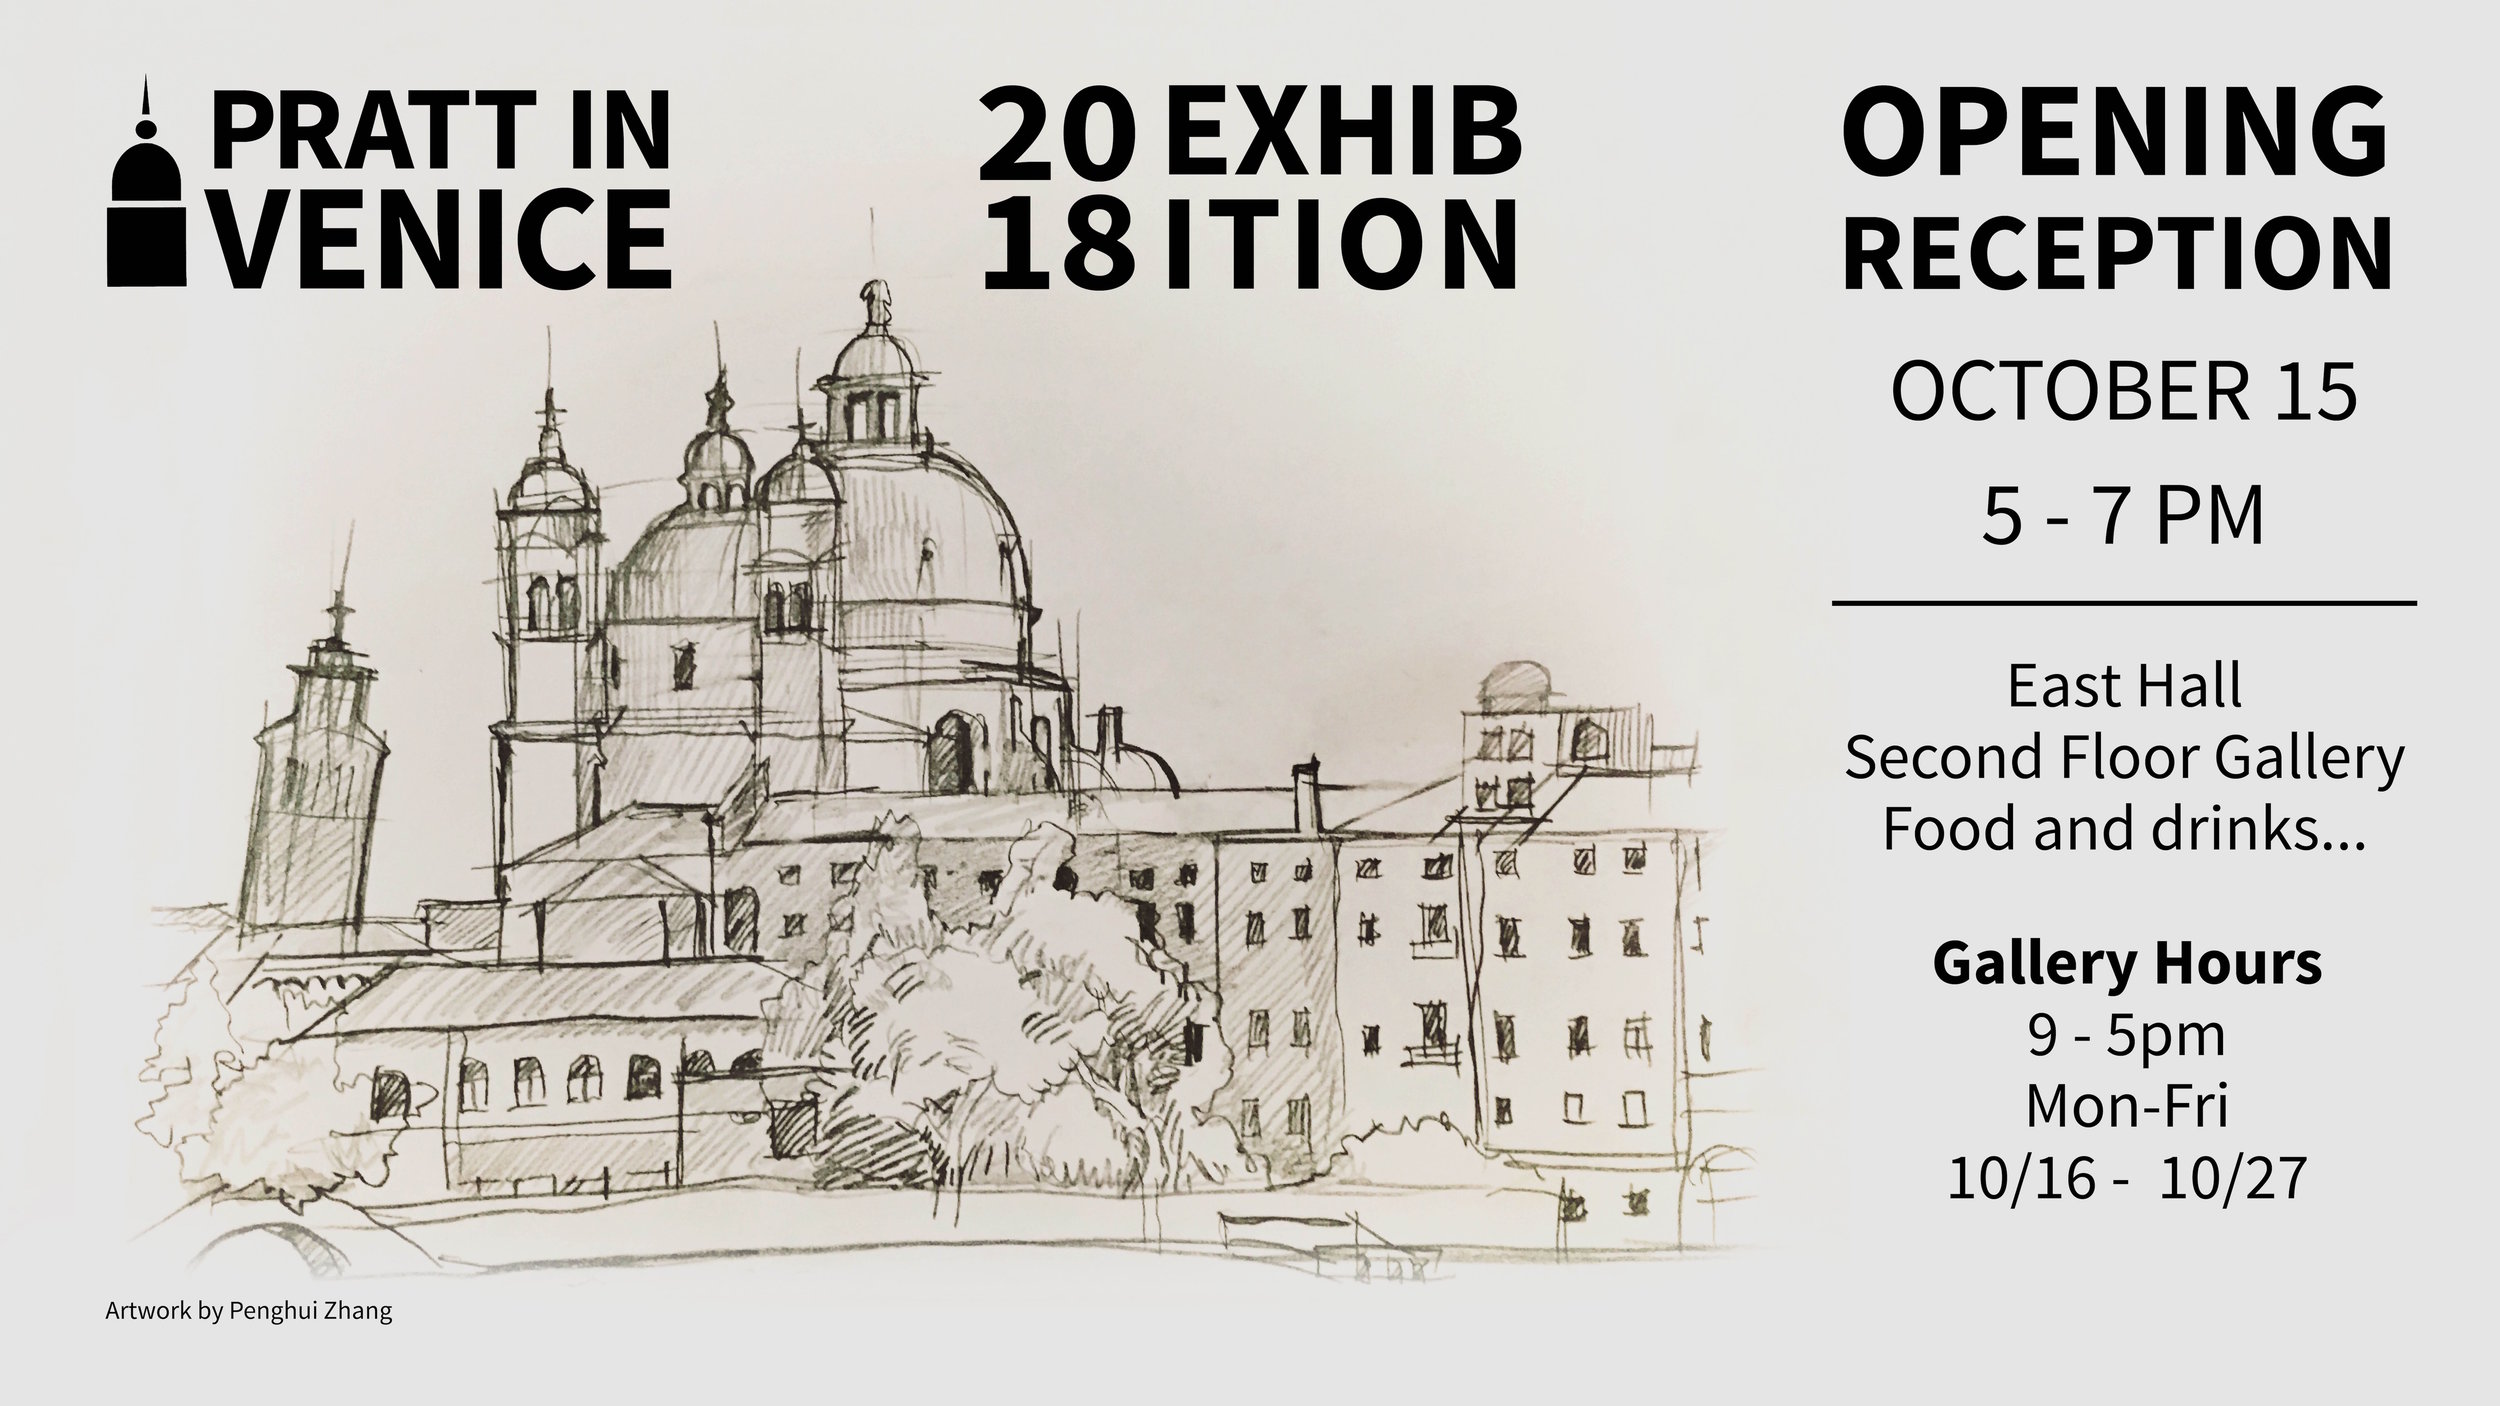 Our annual exhibition's poster featured a sketch of the Church of Salute by Penghui Zhang!